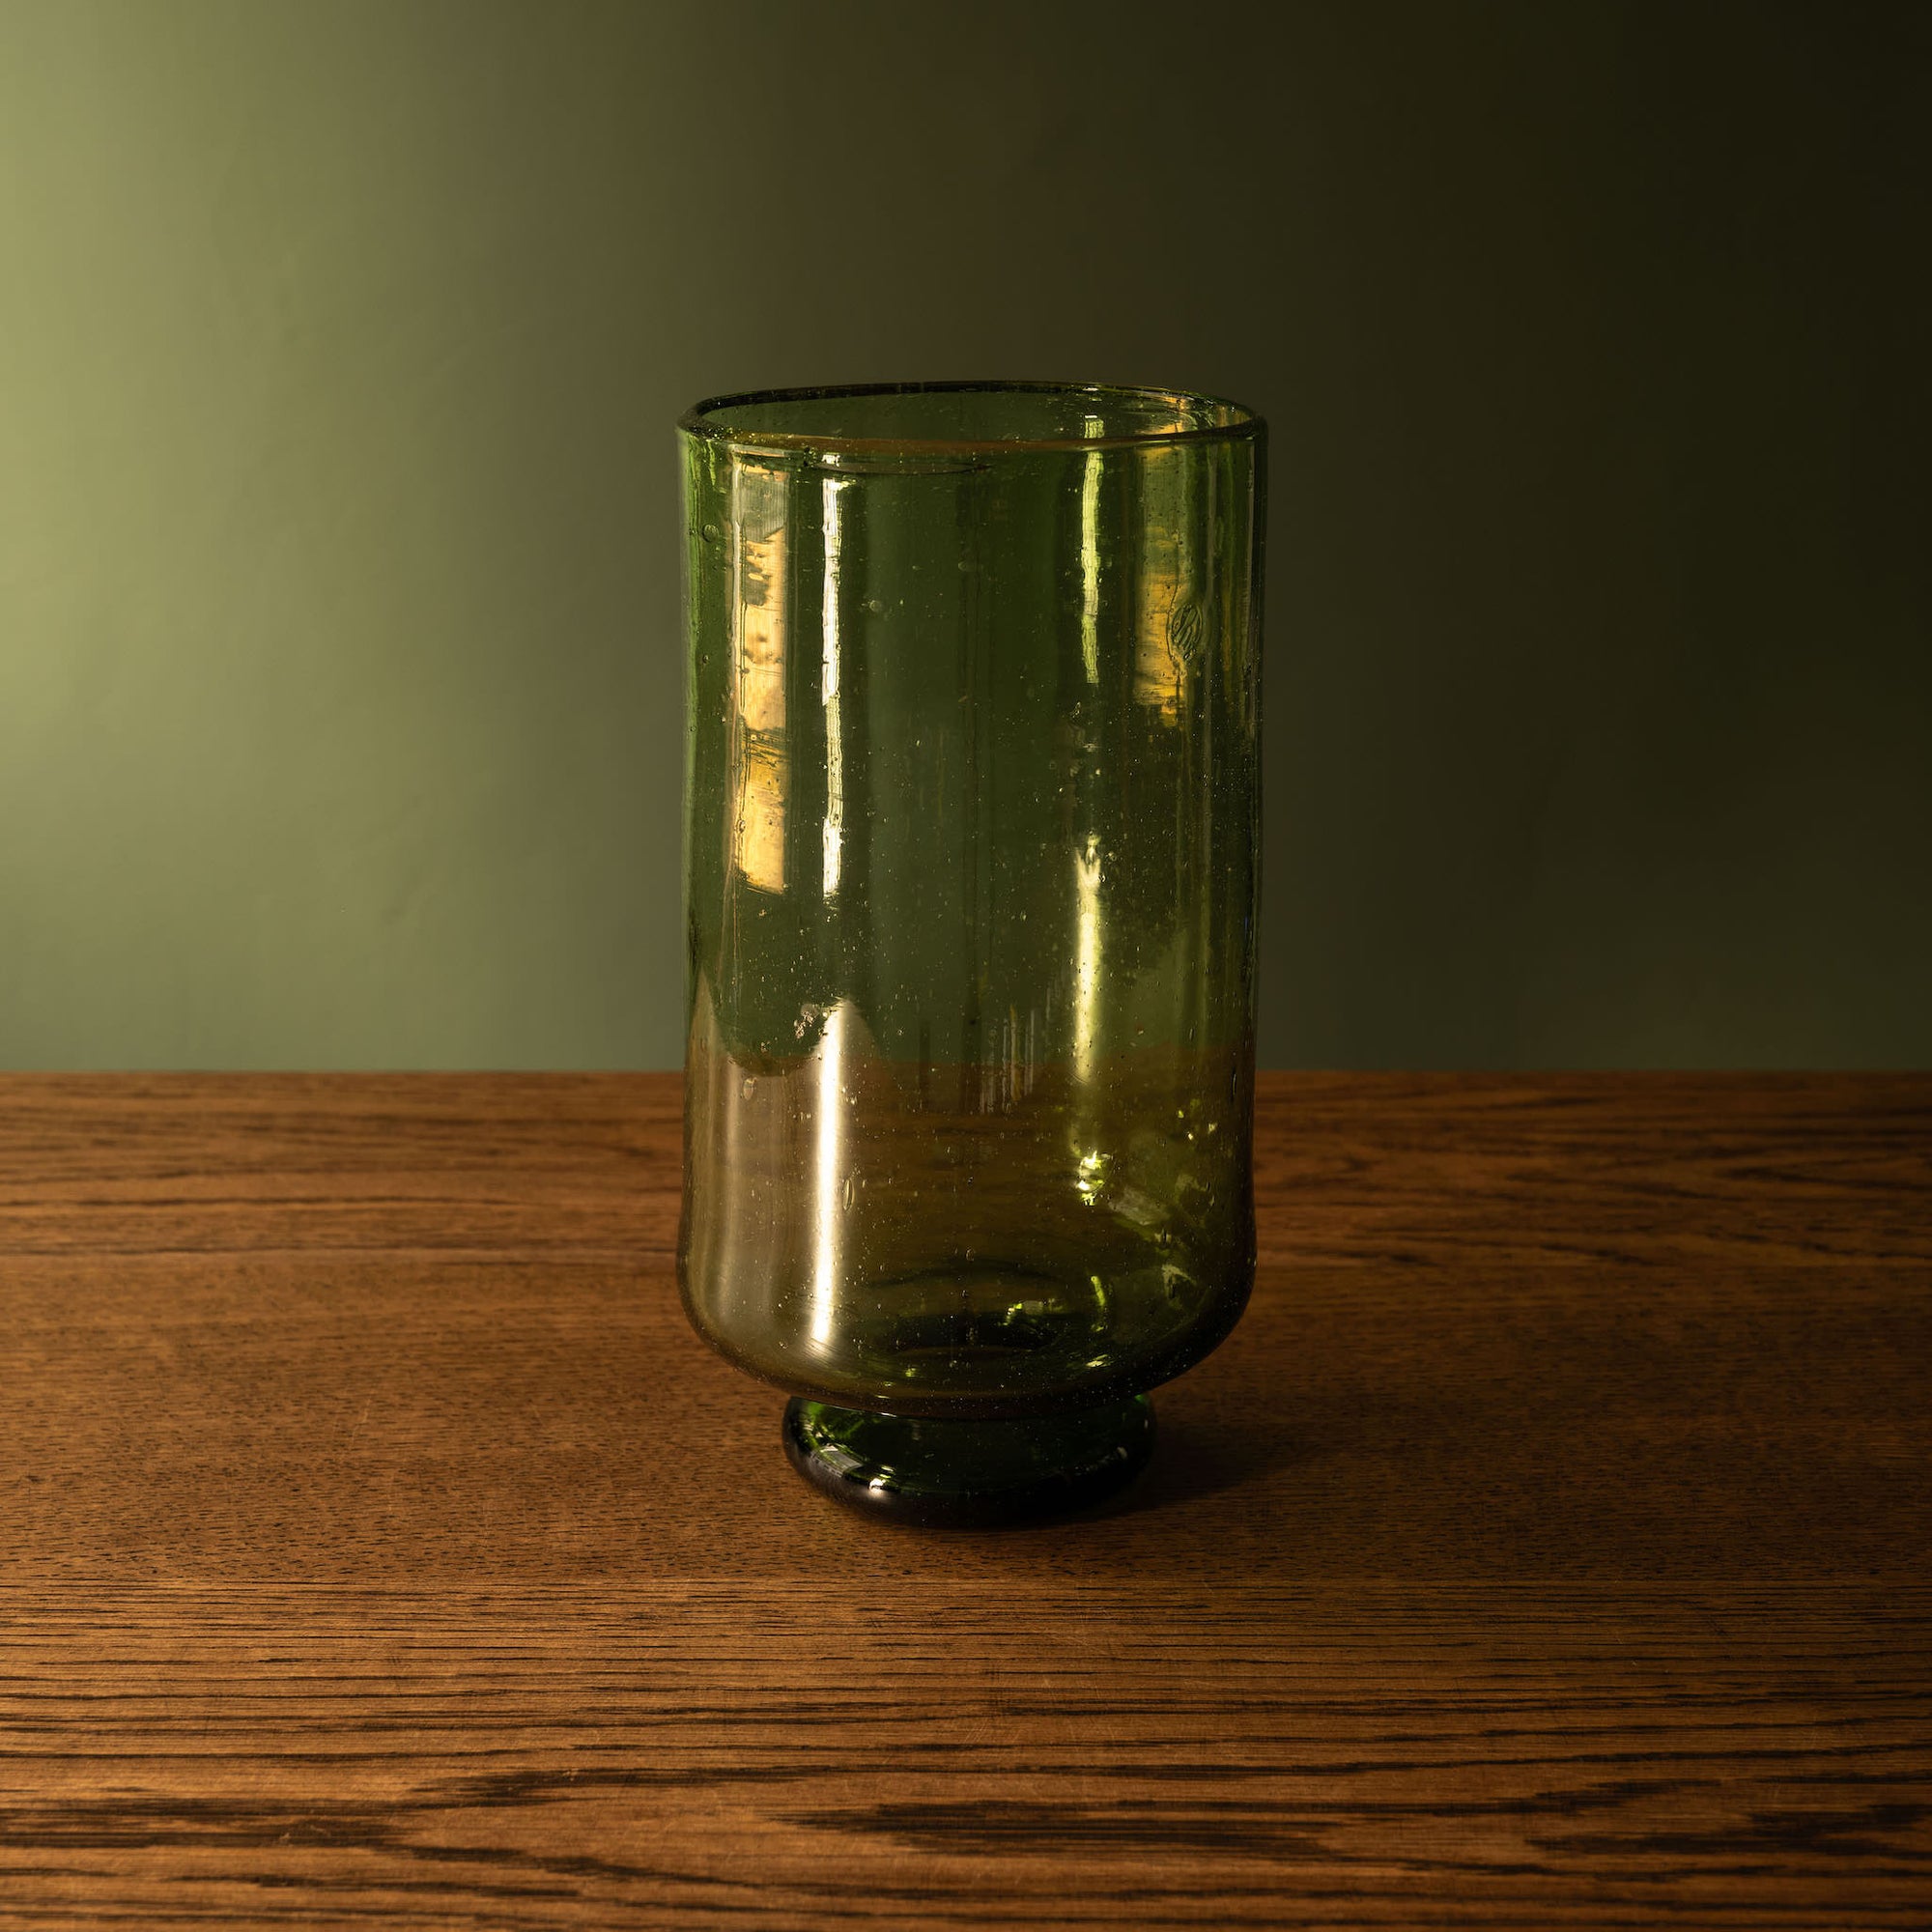 La Soufflerie Pied Douche vase in green recycled glass